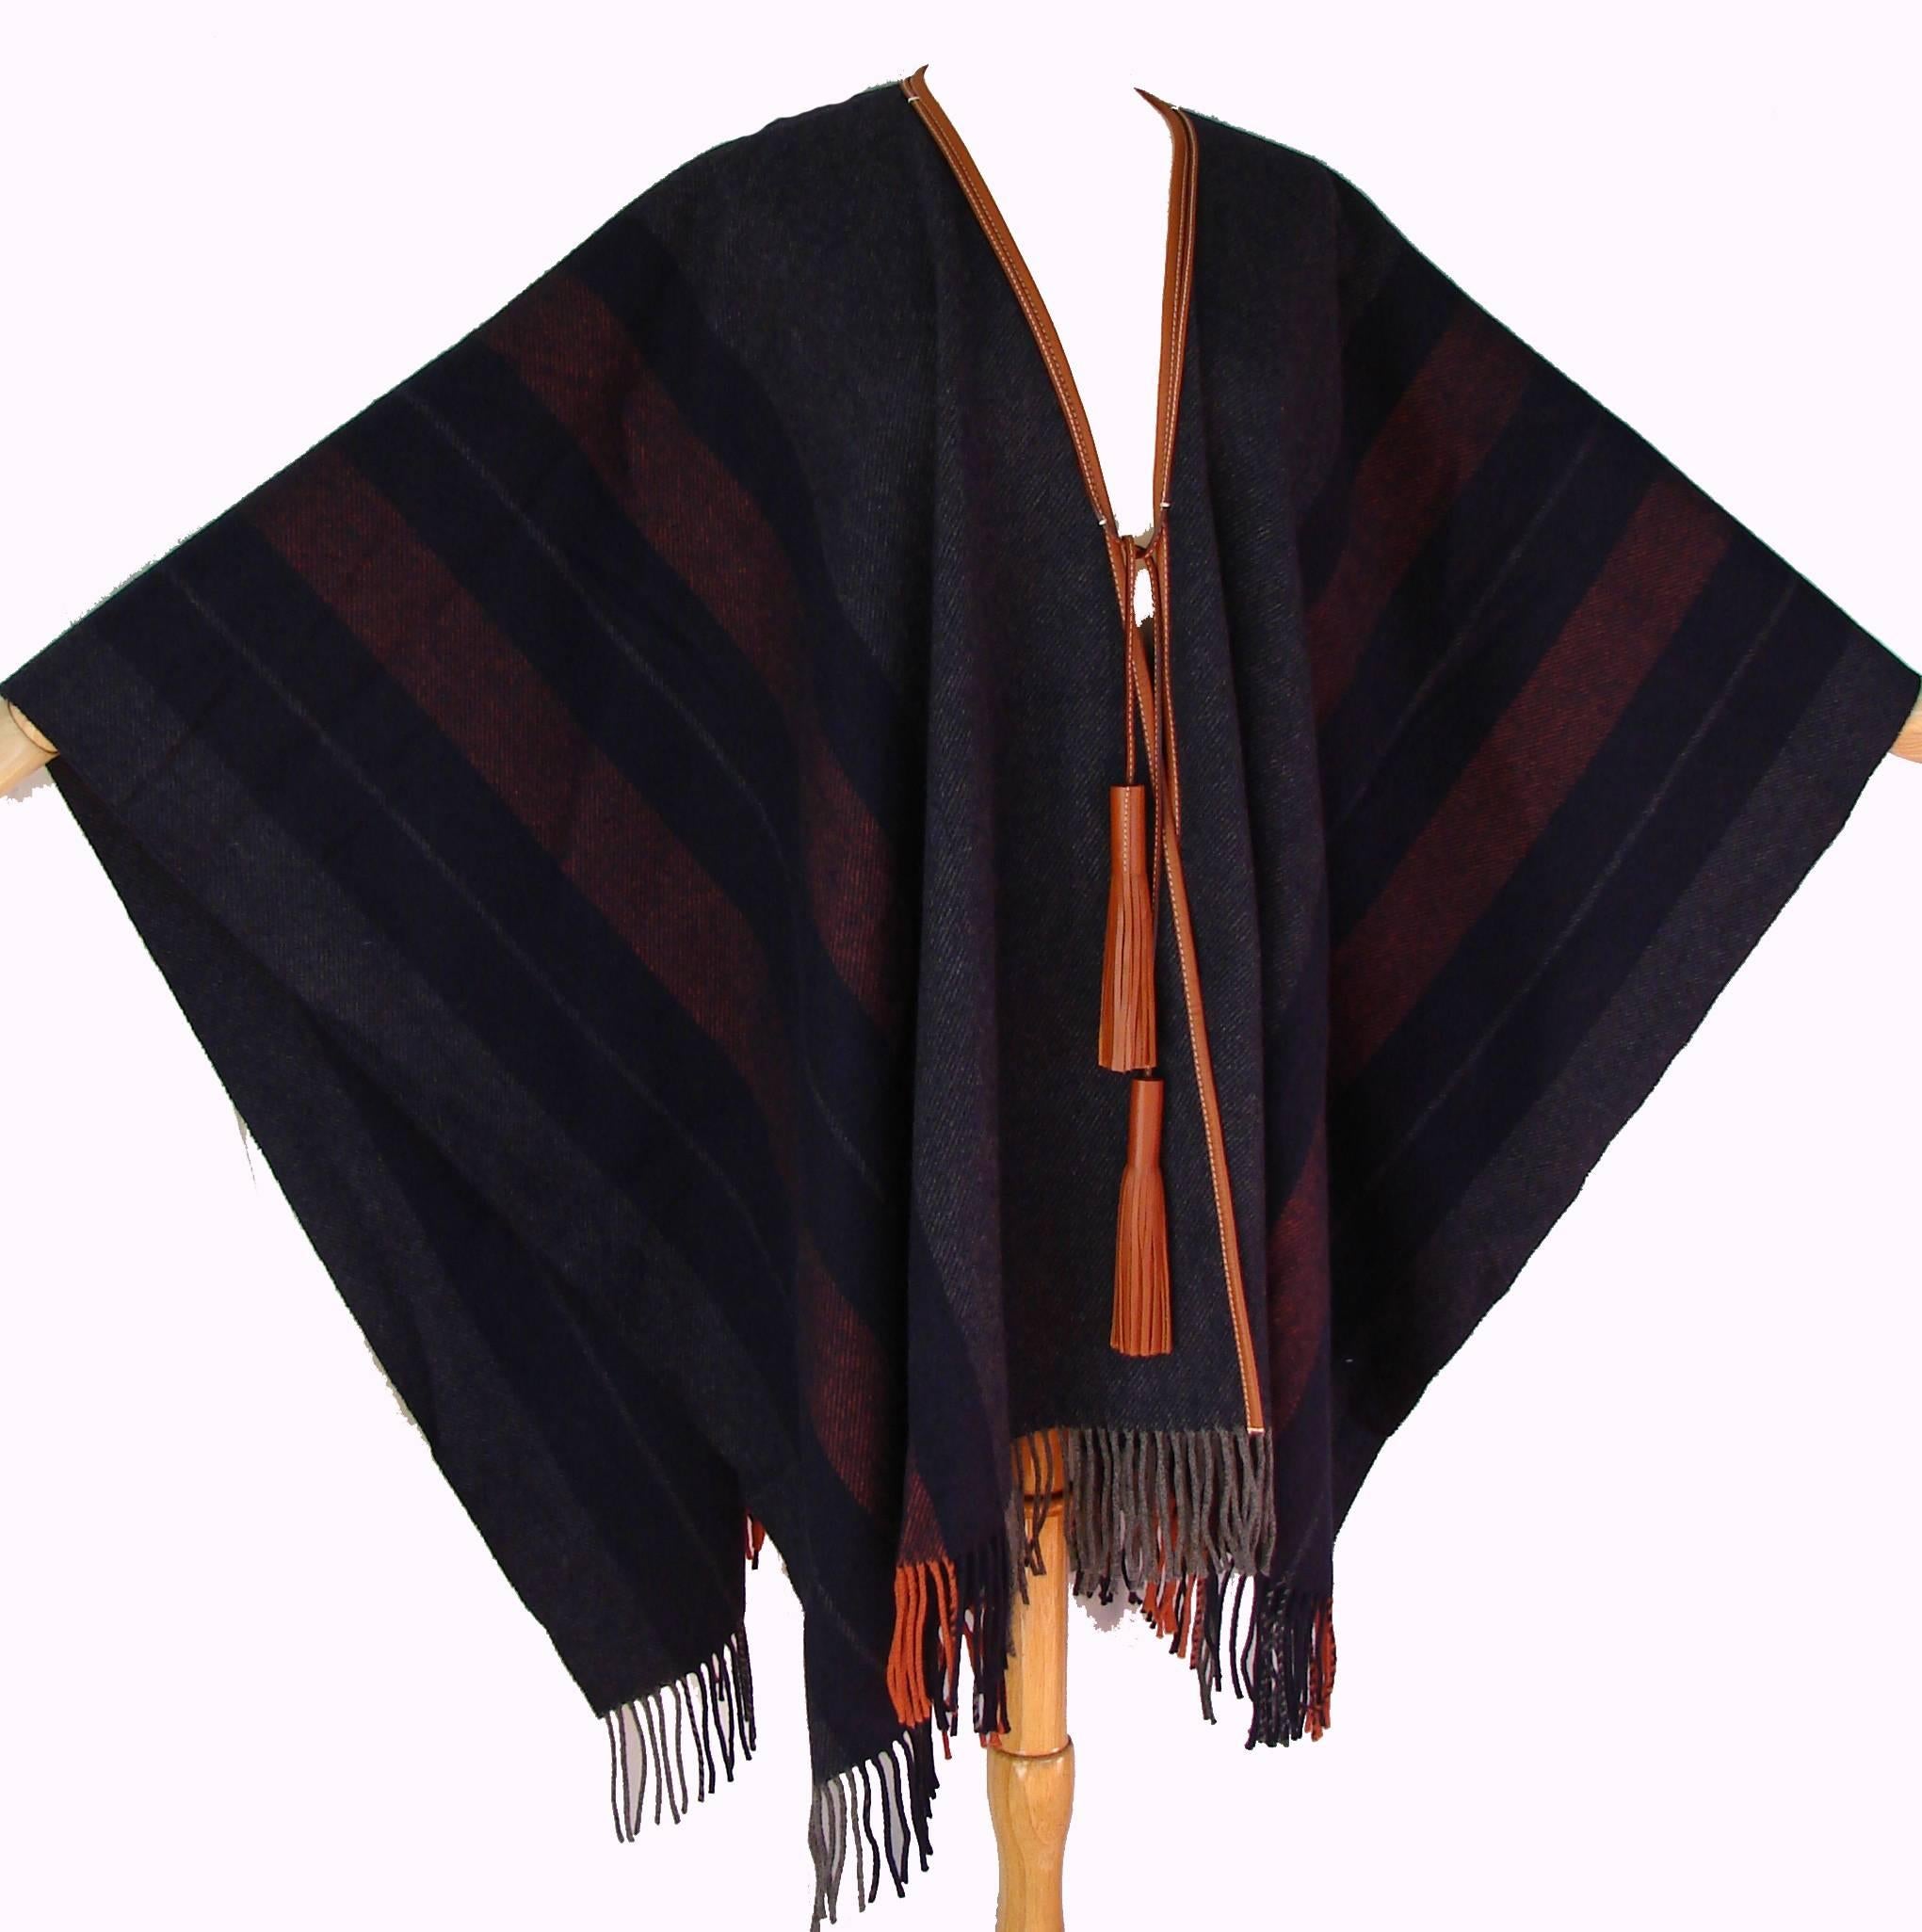 This gorgeous fringed blue Rocabar poncho or shawl is from Hermes and is new in box but without original store tags.  Made from a cashmere & wool blend and trimmed in saddle leather with tassels.  One size fits most.  Measures 62in x 59in.   